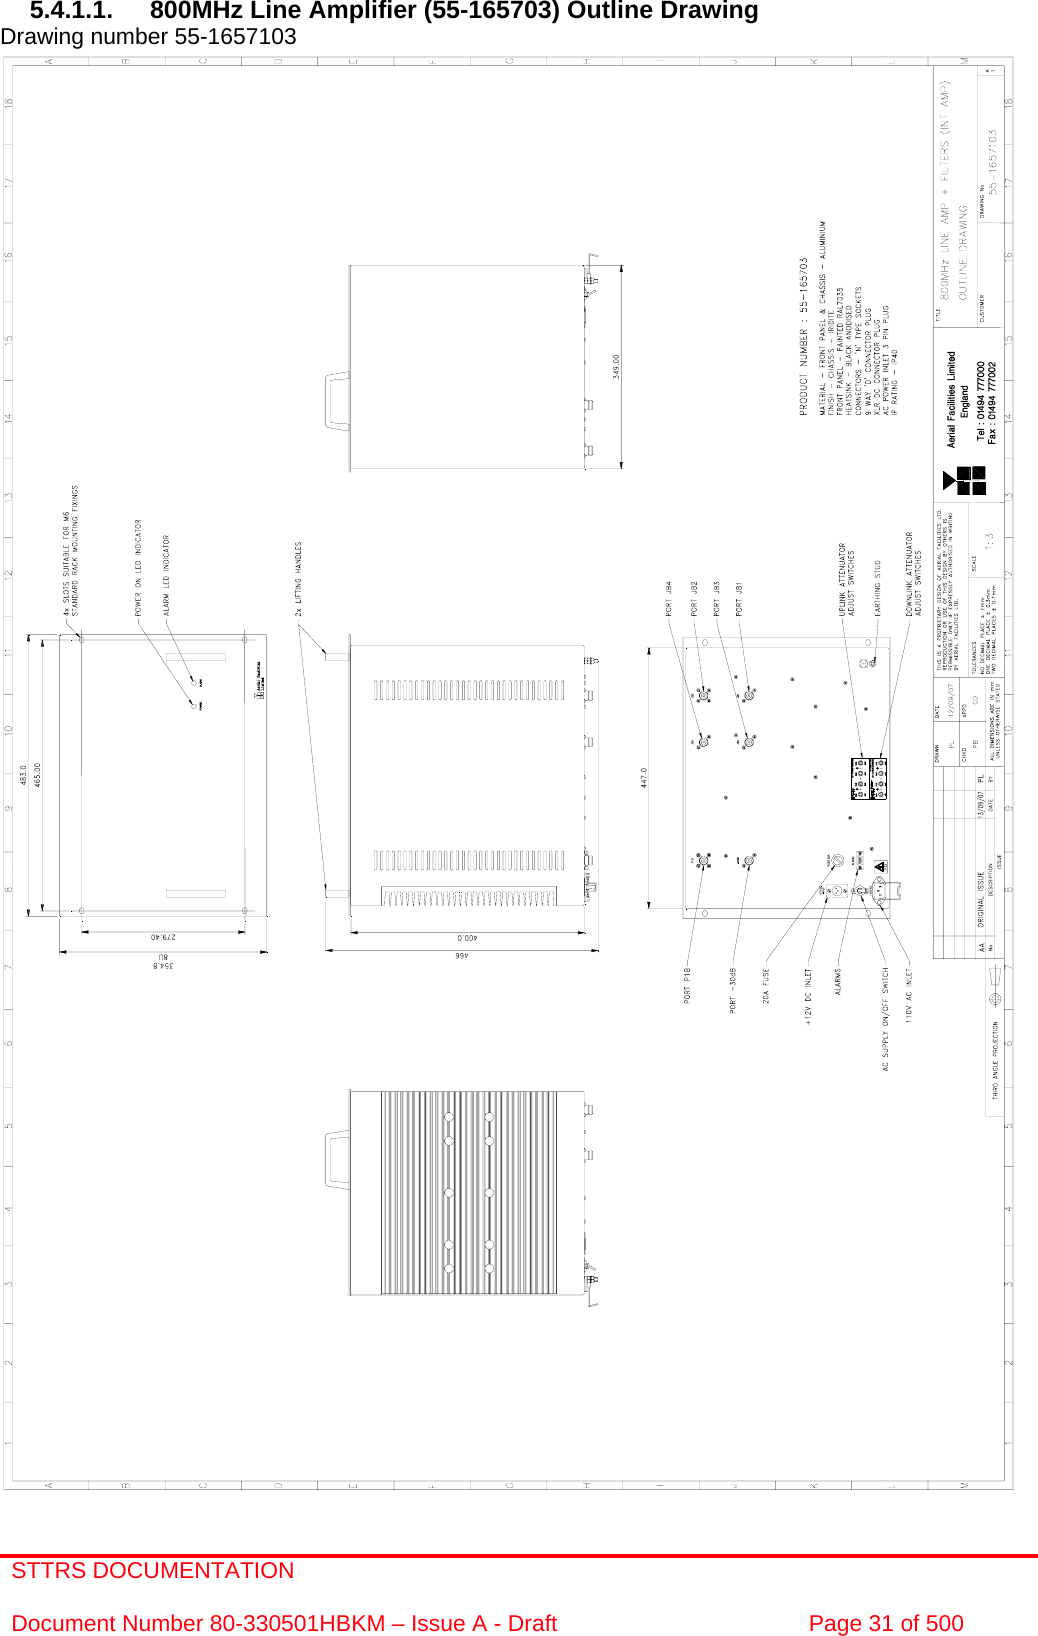 STTRS DOCUMENTATION  Document Number 80-330501HBKM – Issue A - Draft  Page 31 of 500   5.4.1.1.  800MHz Line Amplifier (55-165703) Outline Drawing Drawing number 55-1657103                                                        